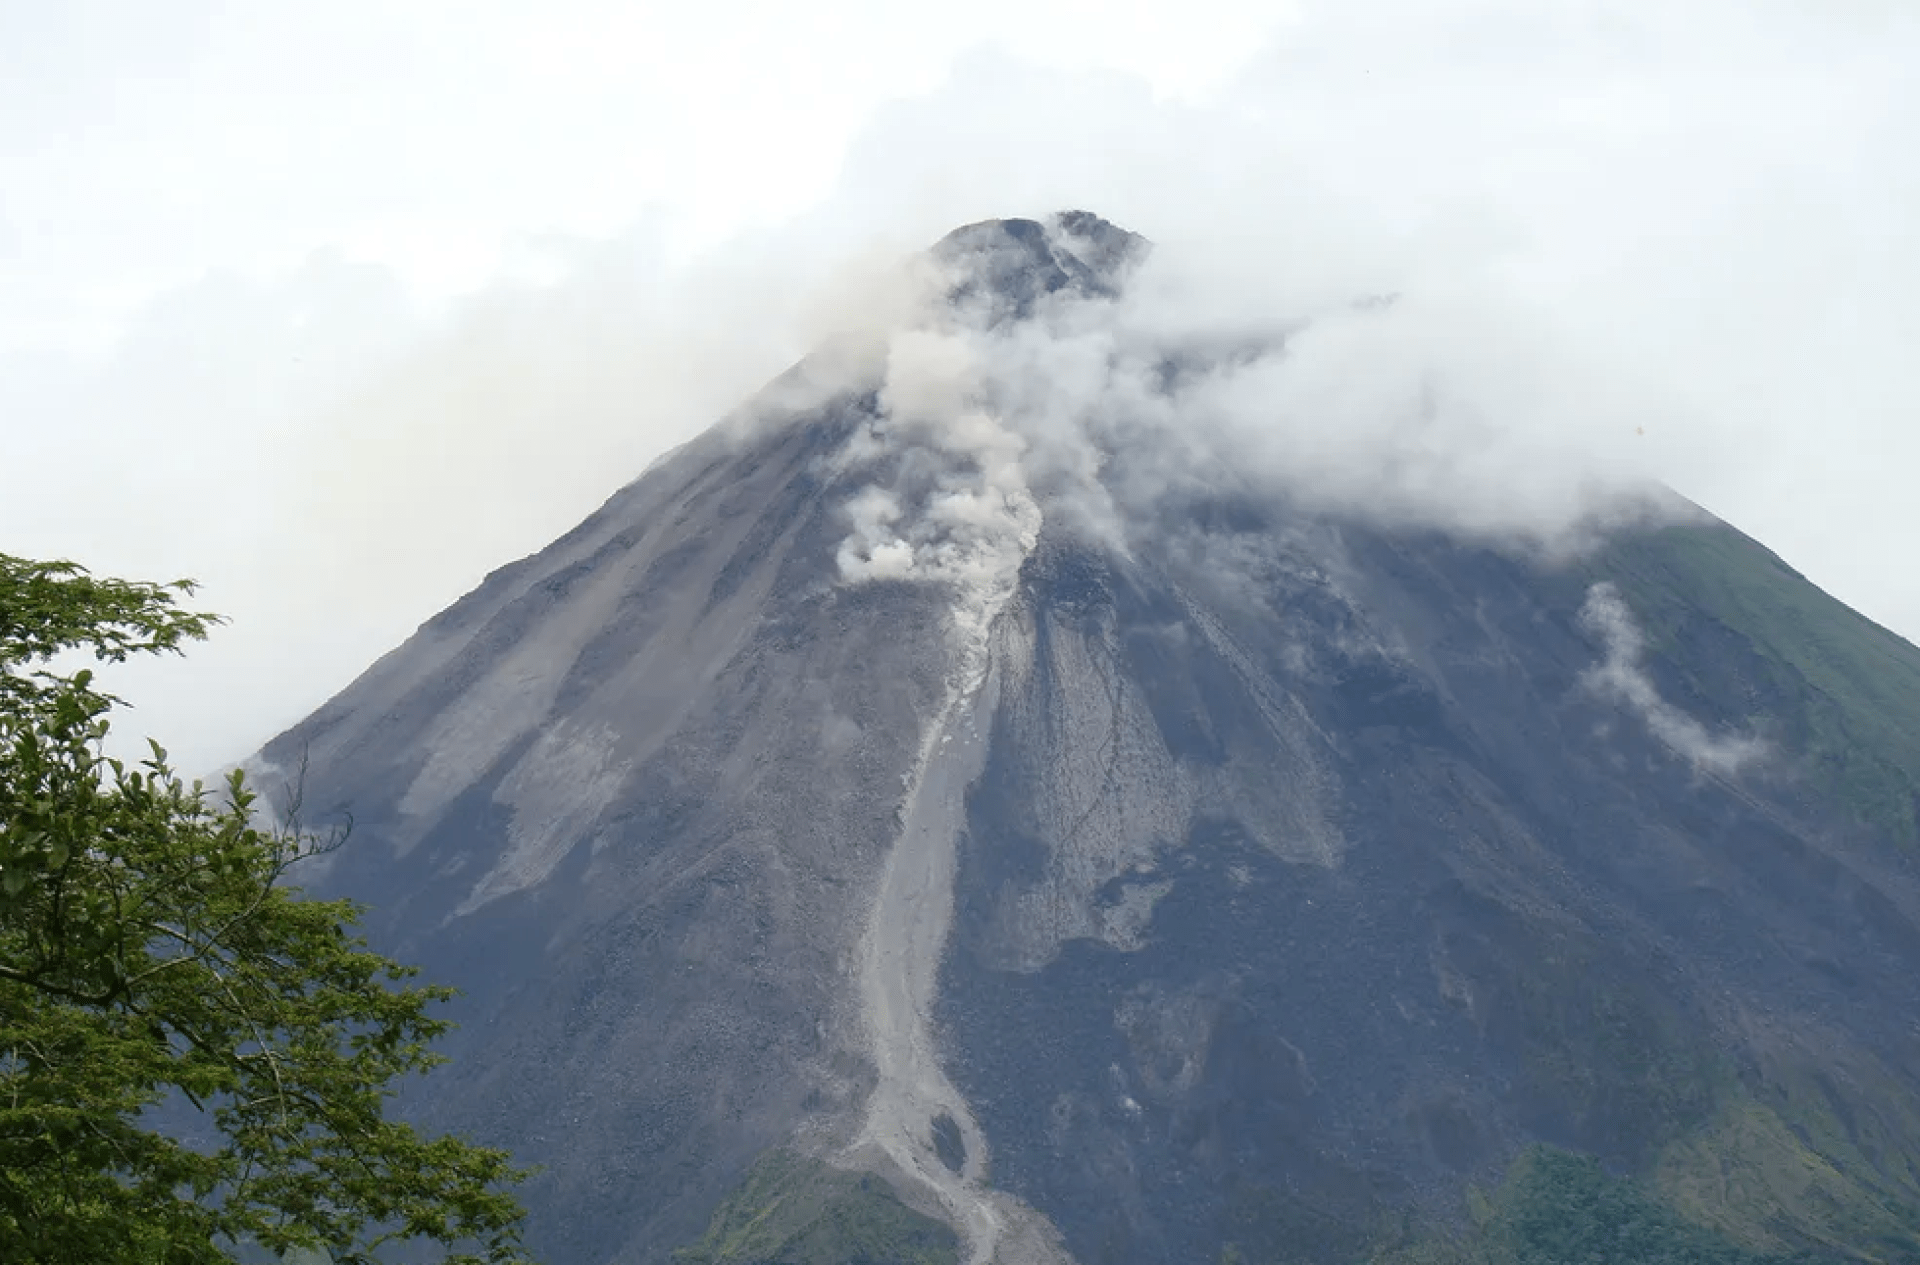 Costa Rica's Arenal volcano spews geysers of lava, ash and toxic gases Ana Fernandez / AFP via Getty Images